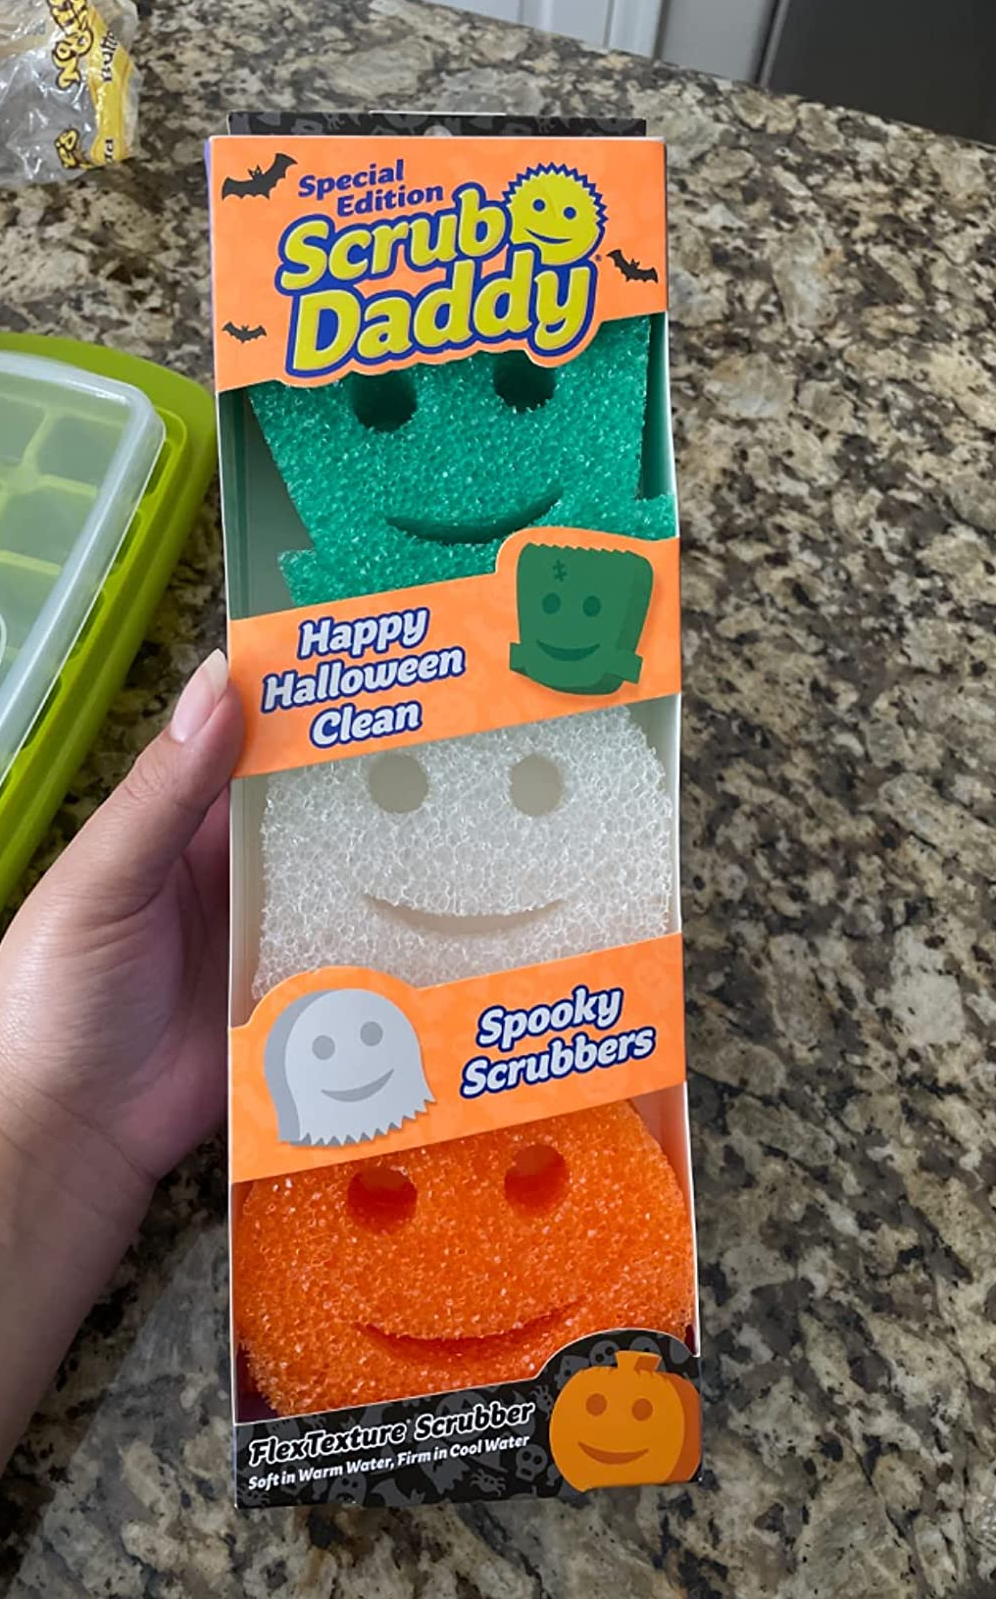 Scrub Daddy Sponge Set - Power Flower - Non Scratch Scrubber for Dishes and  Home, Odor Resistant, Soft in Warm Water, Firm in Cold, Deep Cleaning